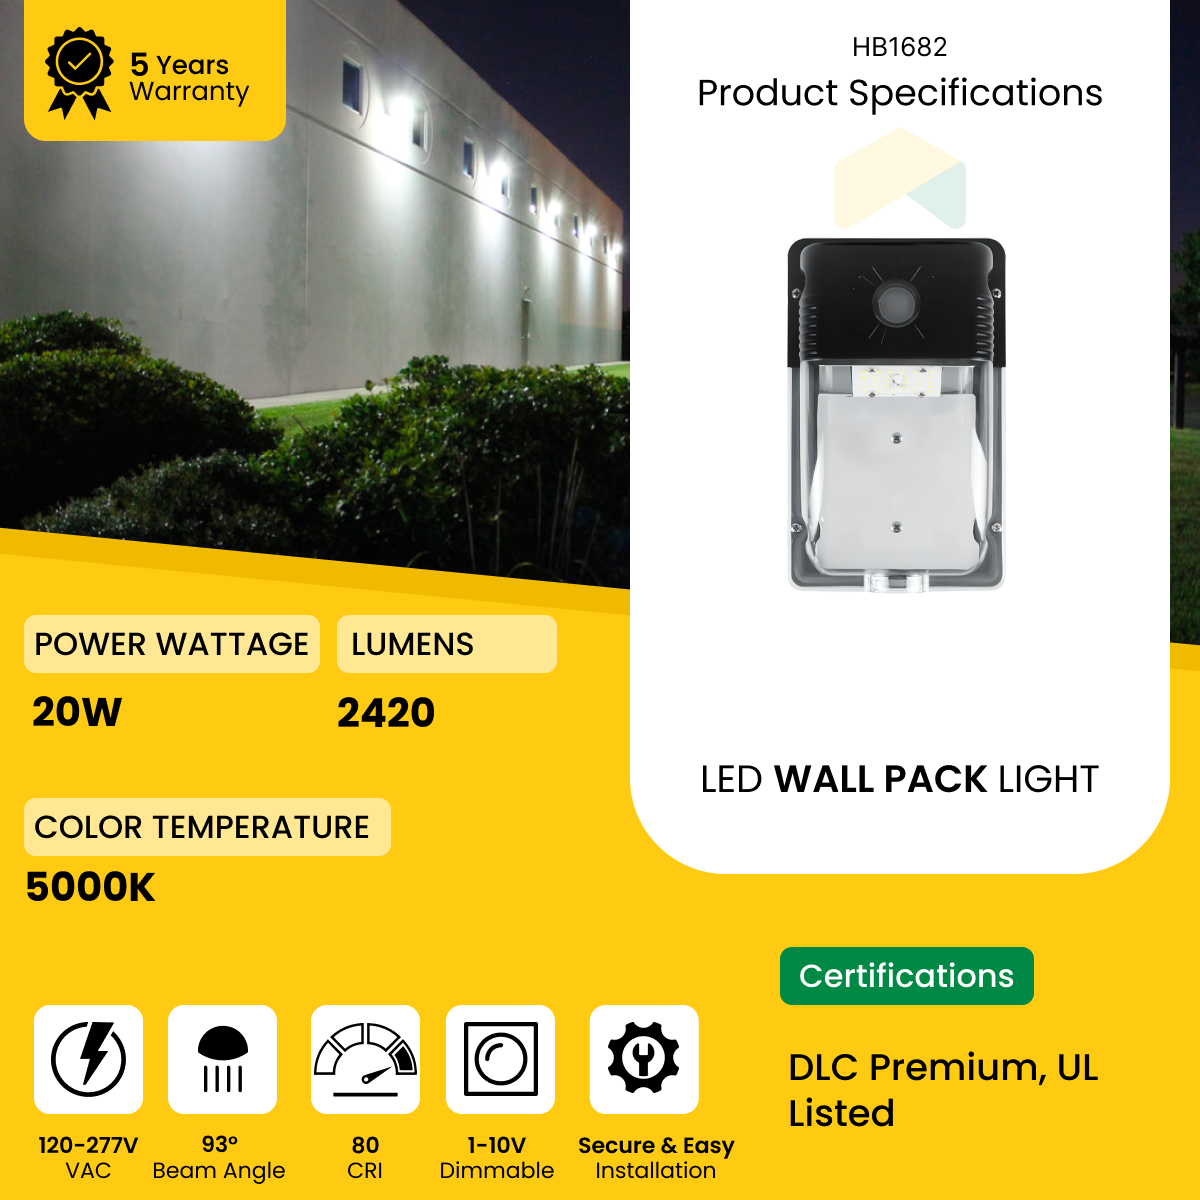 LED Mini Wall Pack Light with Photocell - 20W - 5000K, 2420Lumens - AC120-277V, 0-10V Dimmable - IP66 - UL Listed - DLC Premium Listed - 5 Years Warranty